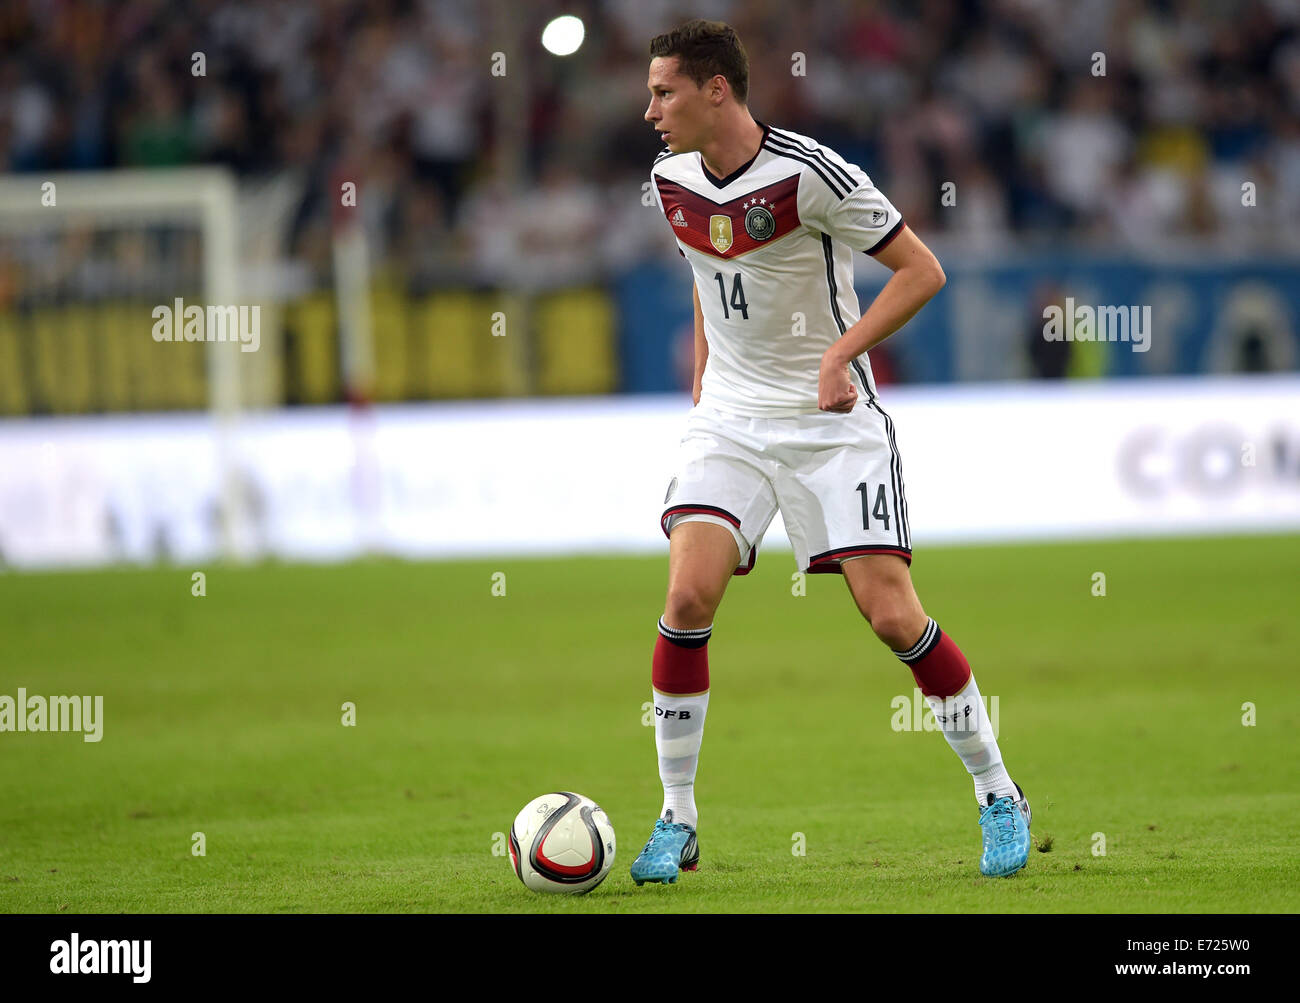 Duesseldorf, Germany. 03rd Sep, 2014. Germany's Julian Draxler vies for the ball during the international soccer match between Germany and Argentina at Esprit arena in Duesseldorf, Germany, 03 September 2014. Photo: Federico Gambarini/dpa/Alamy Live News Stock Photo